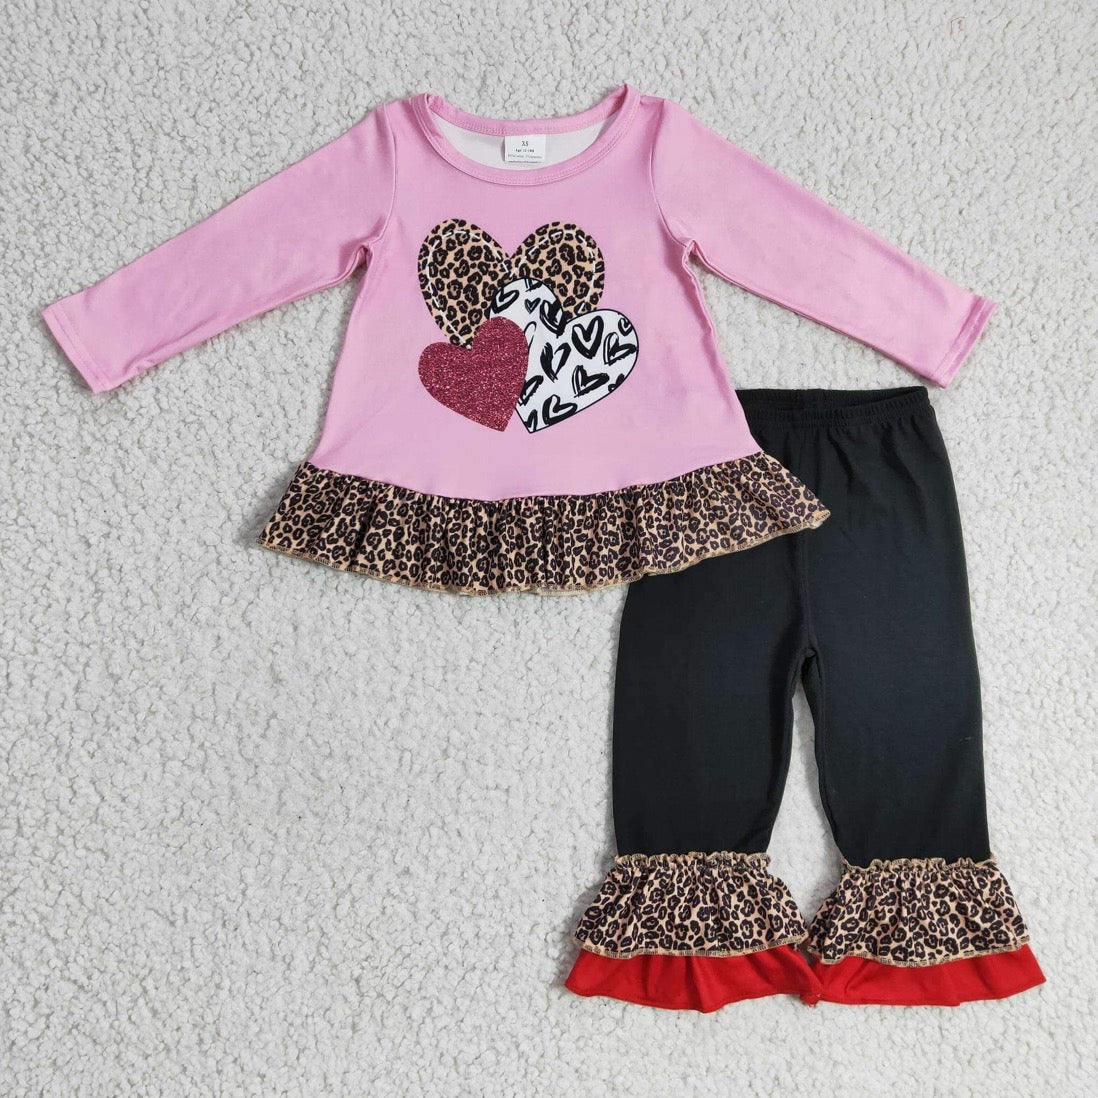 Cheetah Hearts Outfit SHIPS IN 10-15 BIZ DAYS AFTER CLOSE